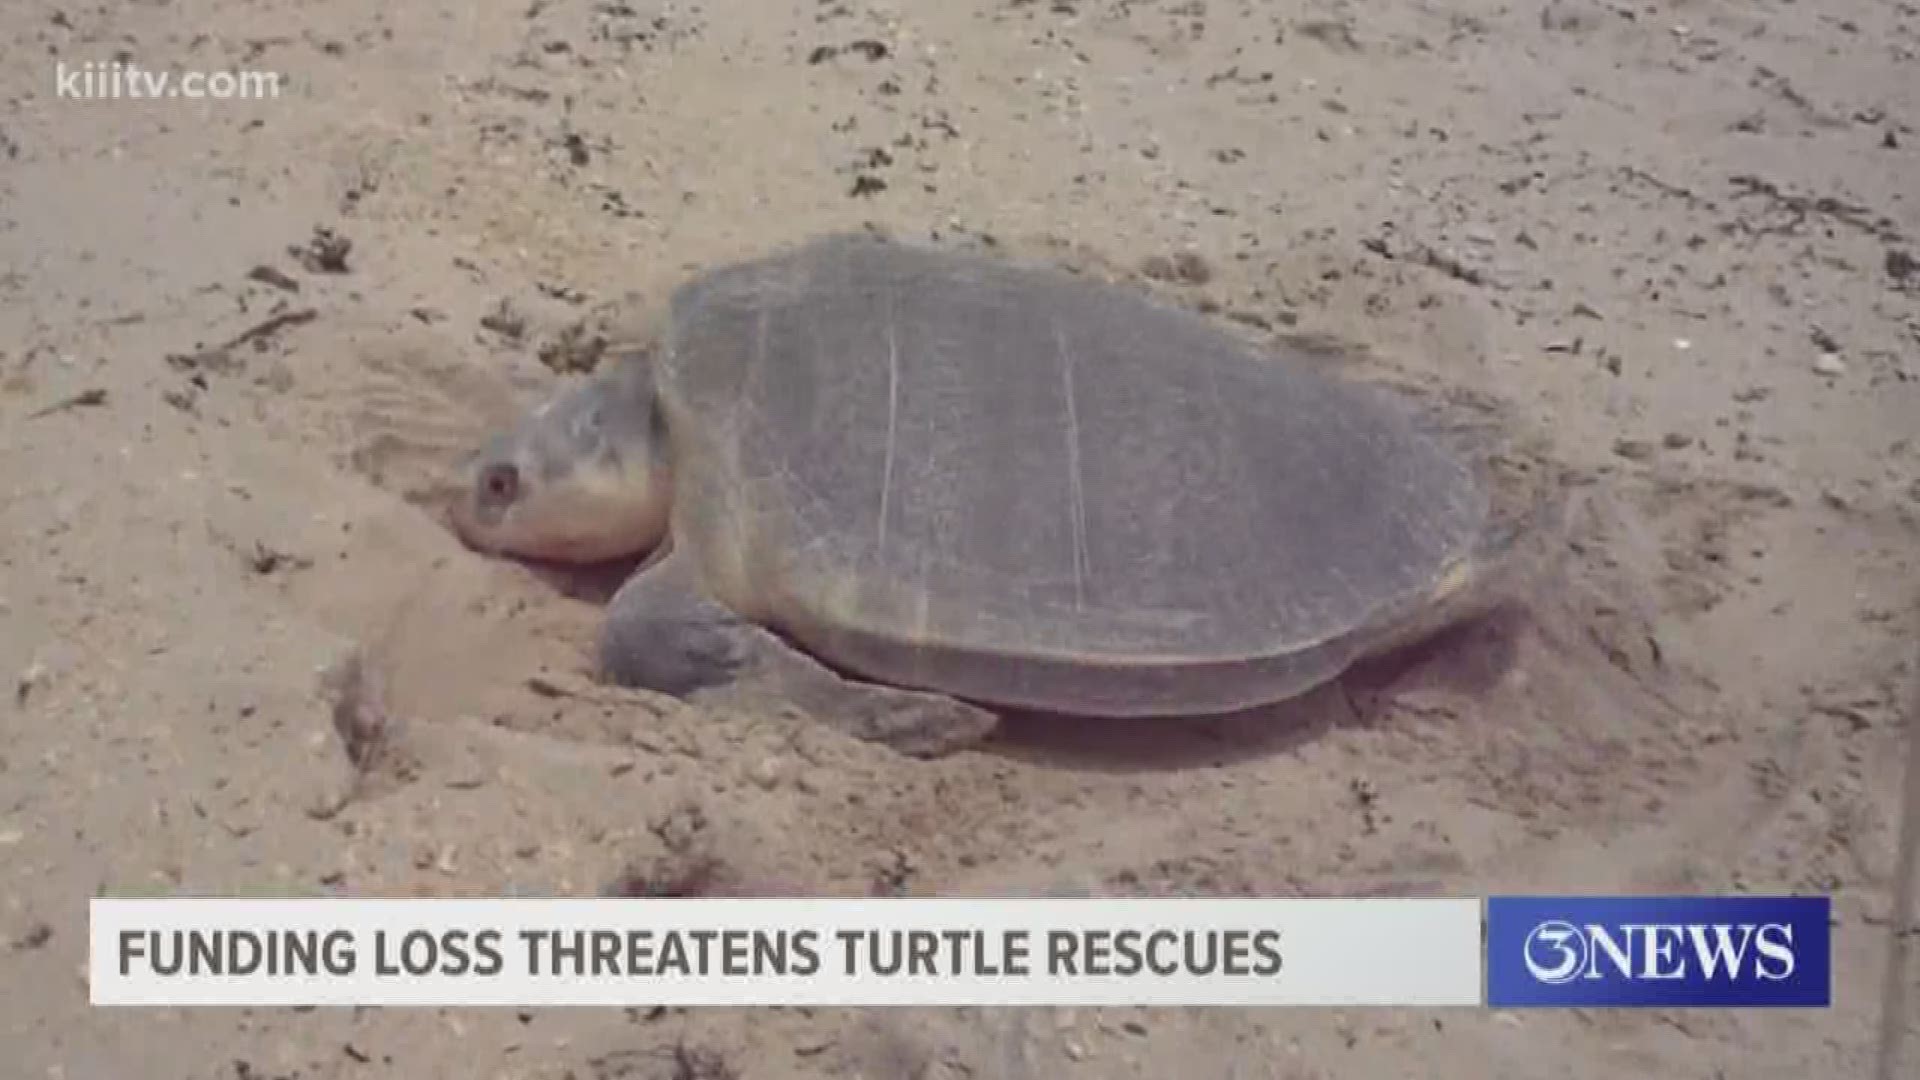 The Sea Turtle Recovery team could face $600,000 budget shortfall by 2025.